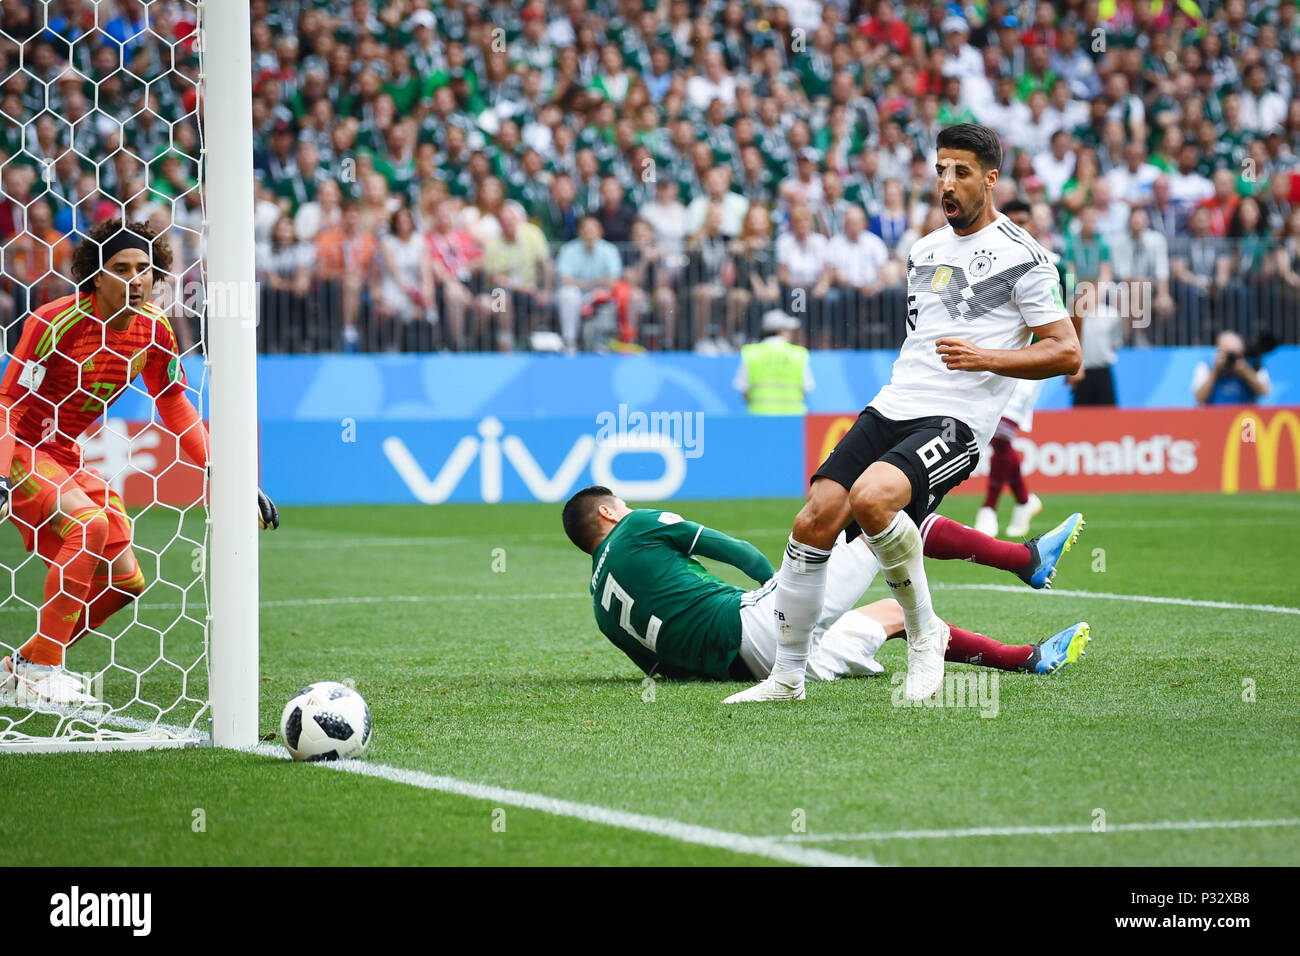 Moscow, Russia. 17th June, 2018. Sami Khedira (Germany) with a great chance versus Guillermo Ochoa (Mexico, l.) And Hugo Ayala (Mexico, r.). GES/Football/World Cup 2018 Russia: Germany - Mexico, 17.06.2018 GES/Soccer/Football/Worldcup 2018 Russia: Germany vs Mexico, Moscow, June 17, 2018 | usage worldwide Credit: dpa/Alamy Live News Stock Photo